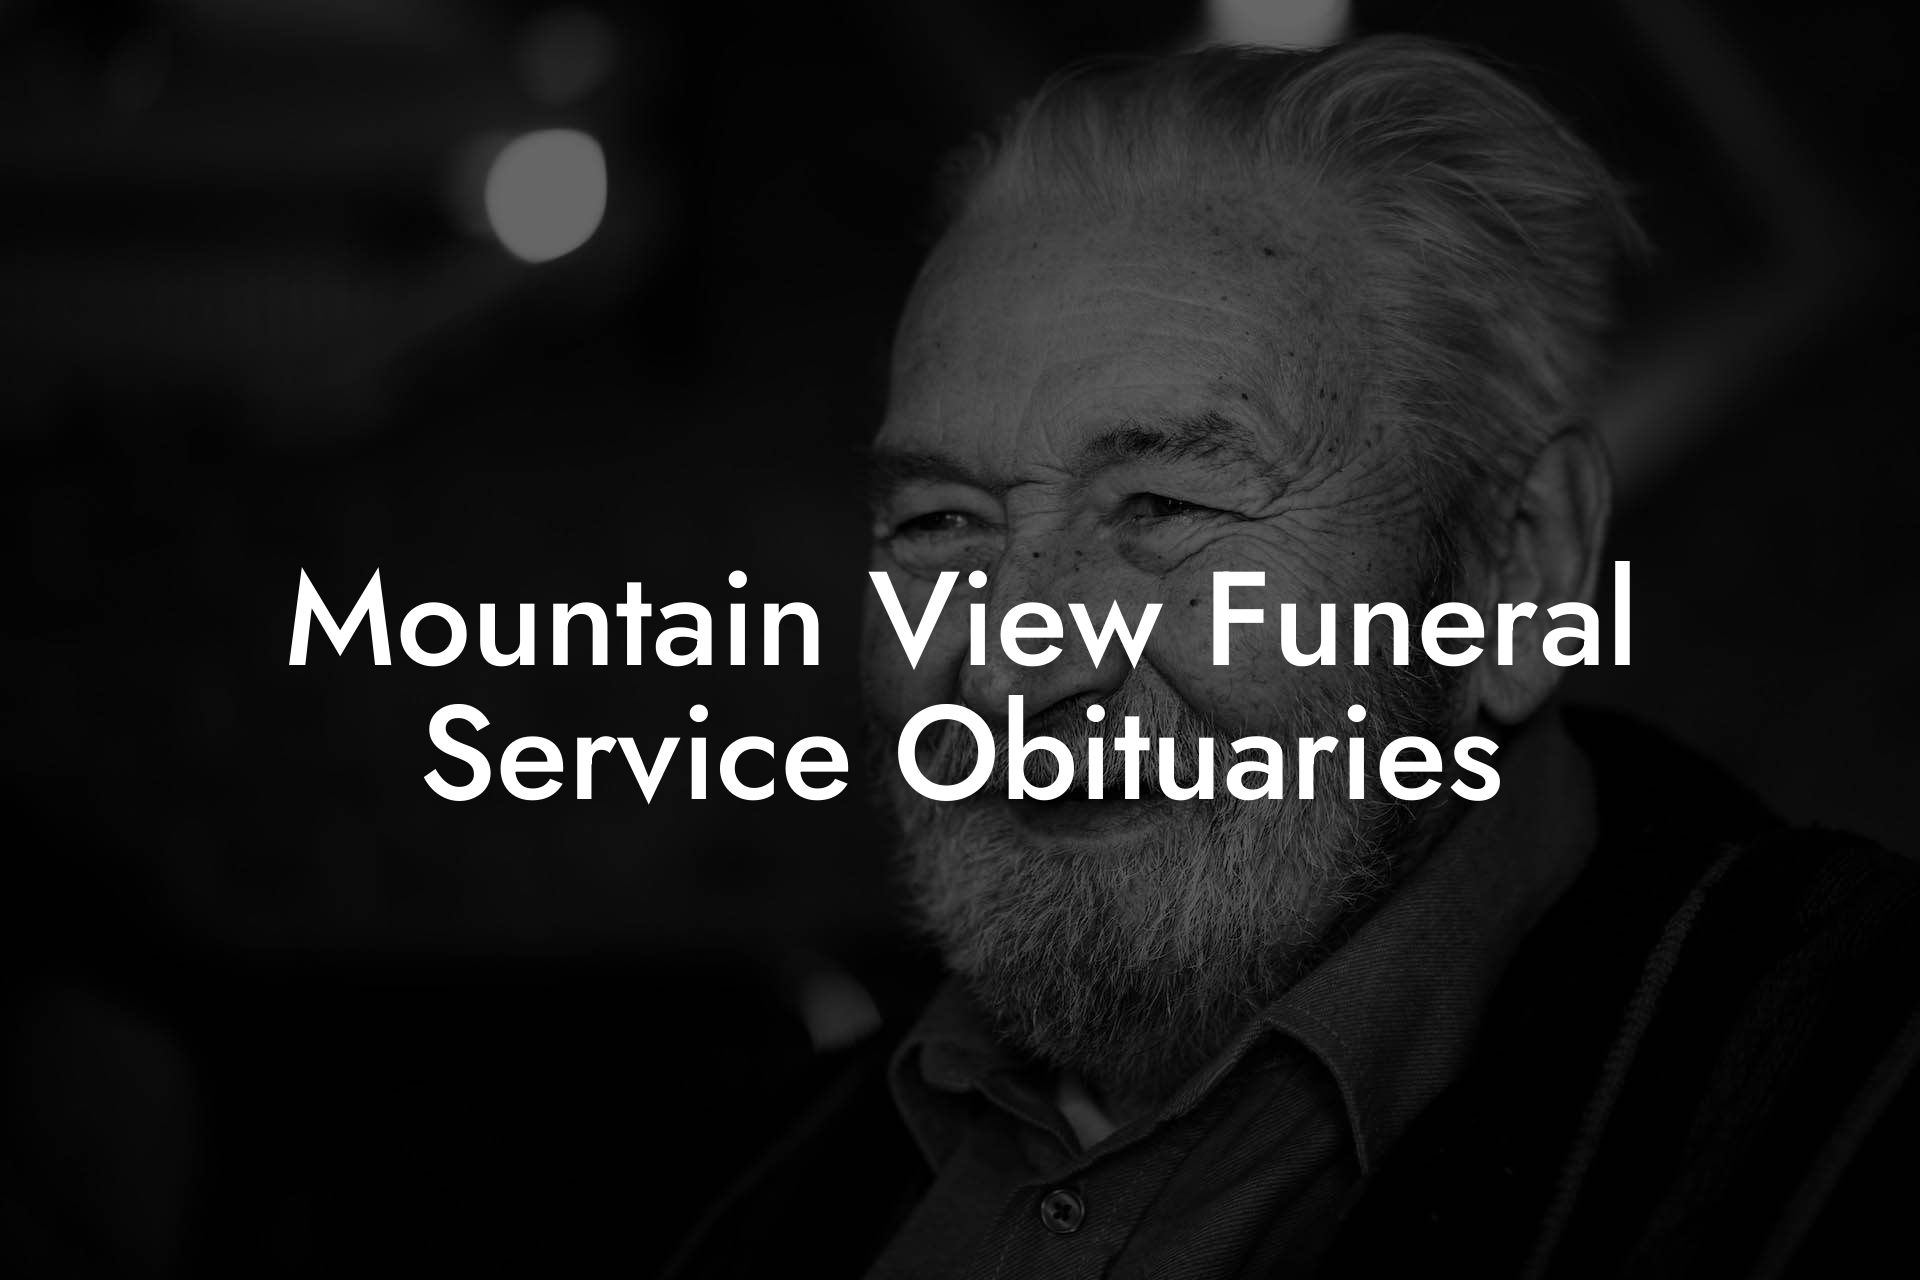 Mountain View Funeral Service Obituaries